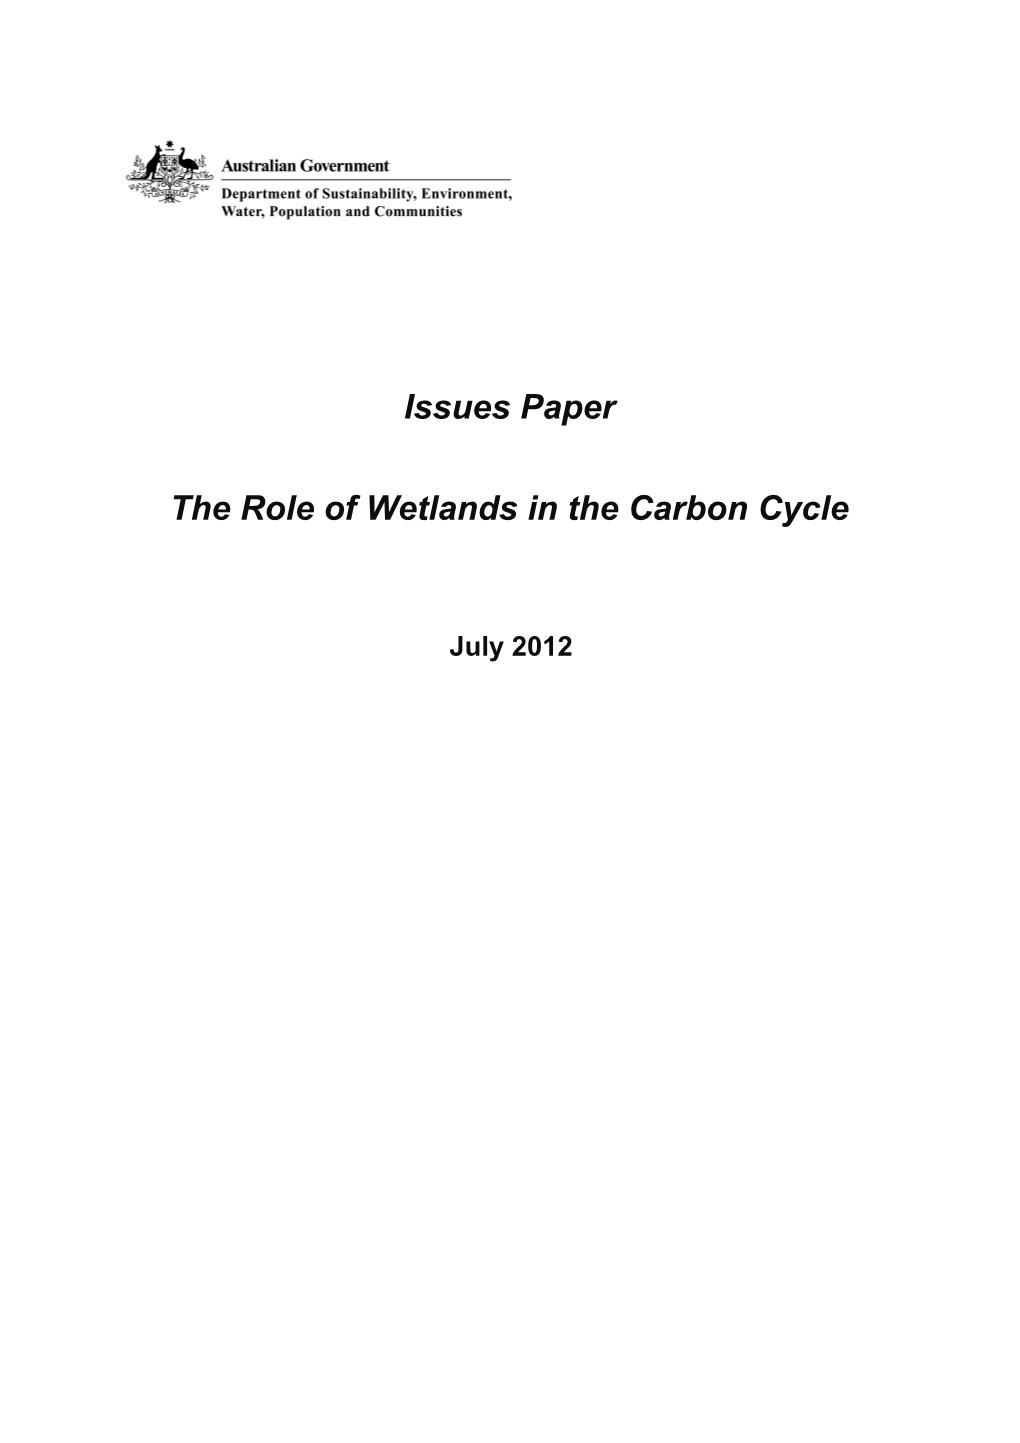 Issues Paper: the Role of Wetlands in the Carbon Cycle